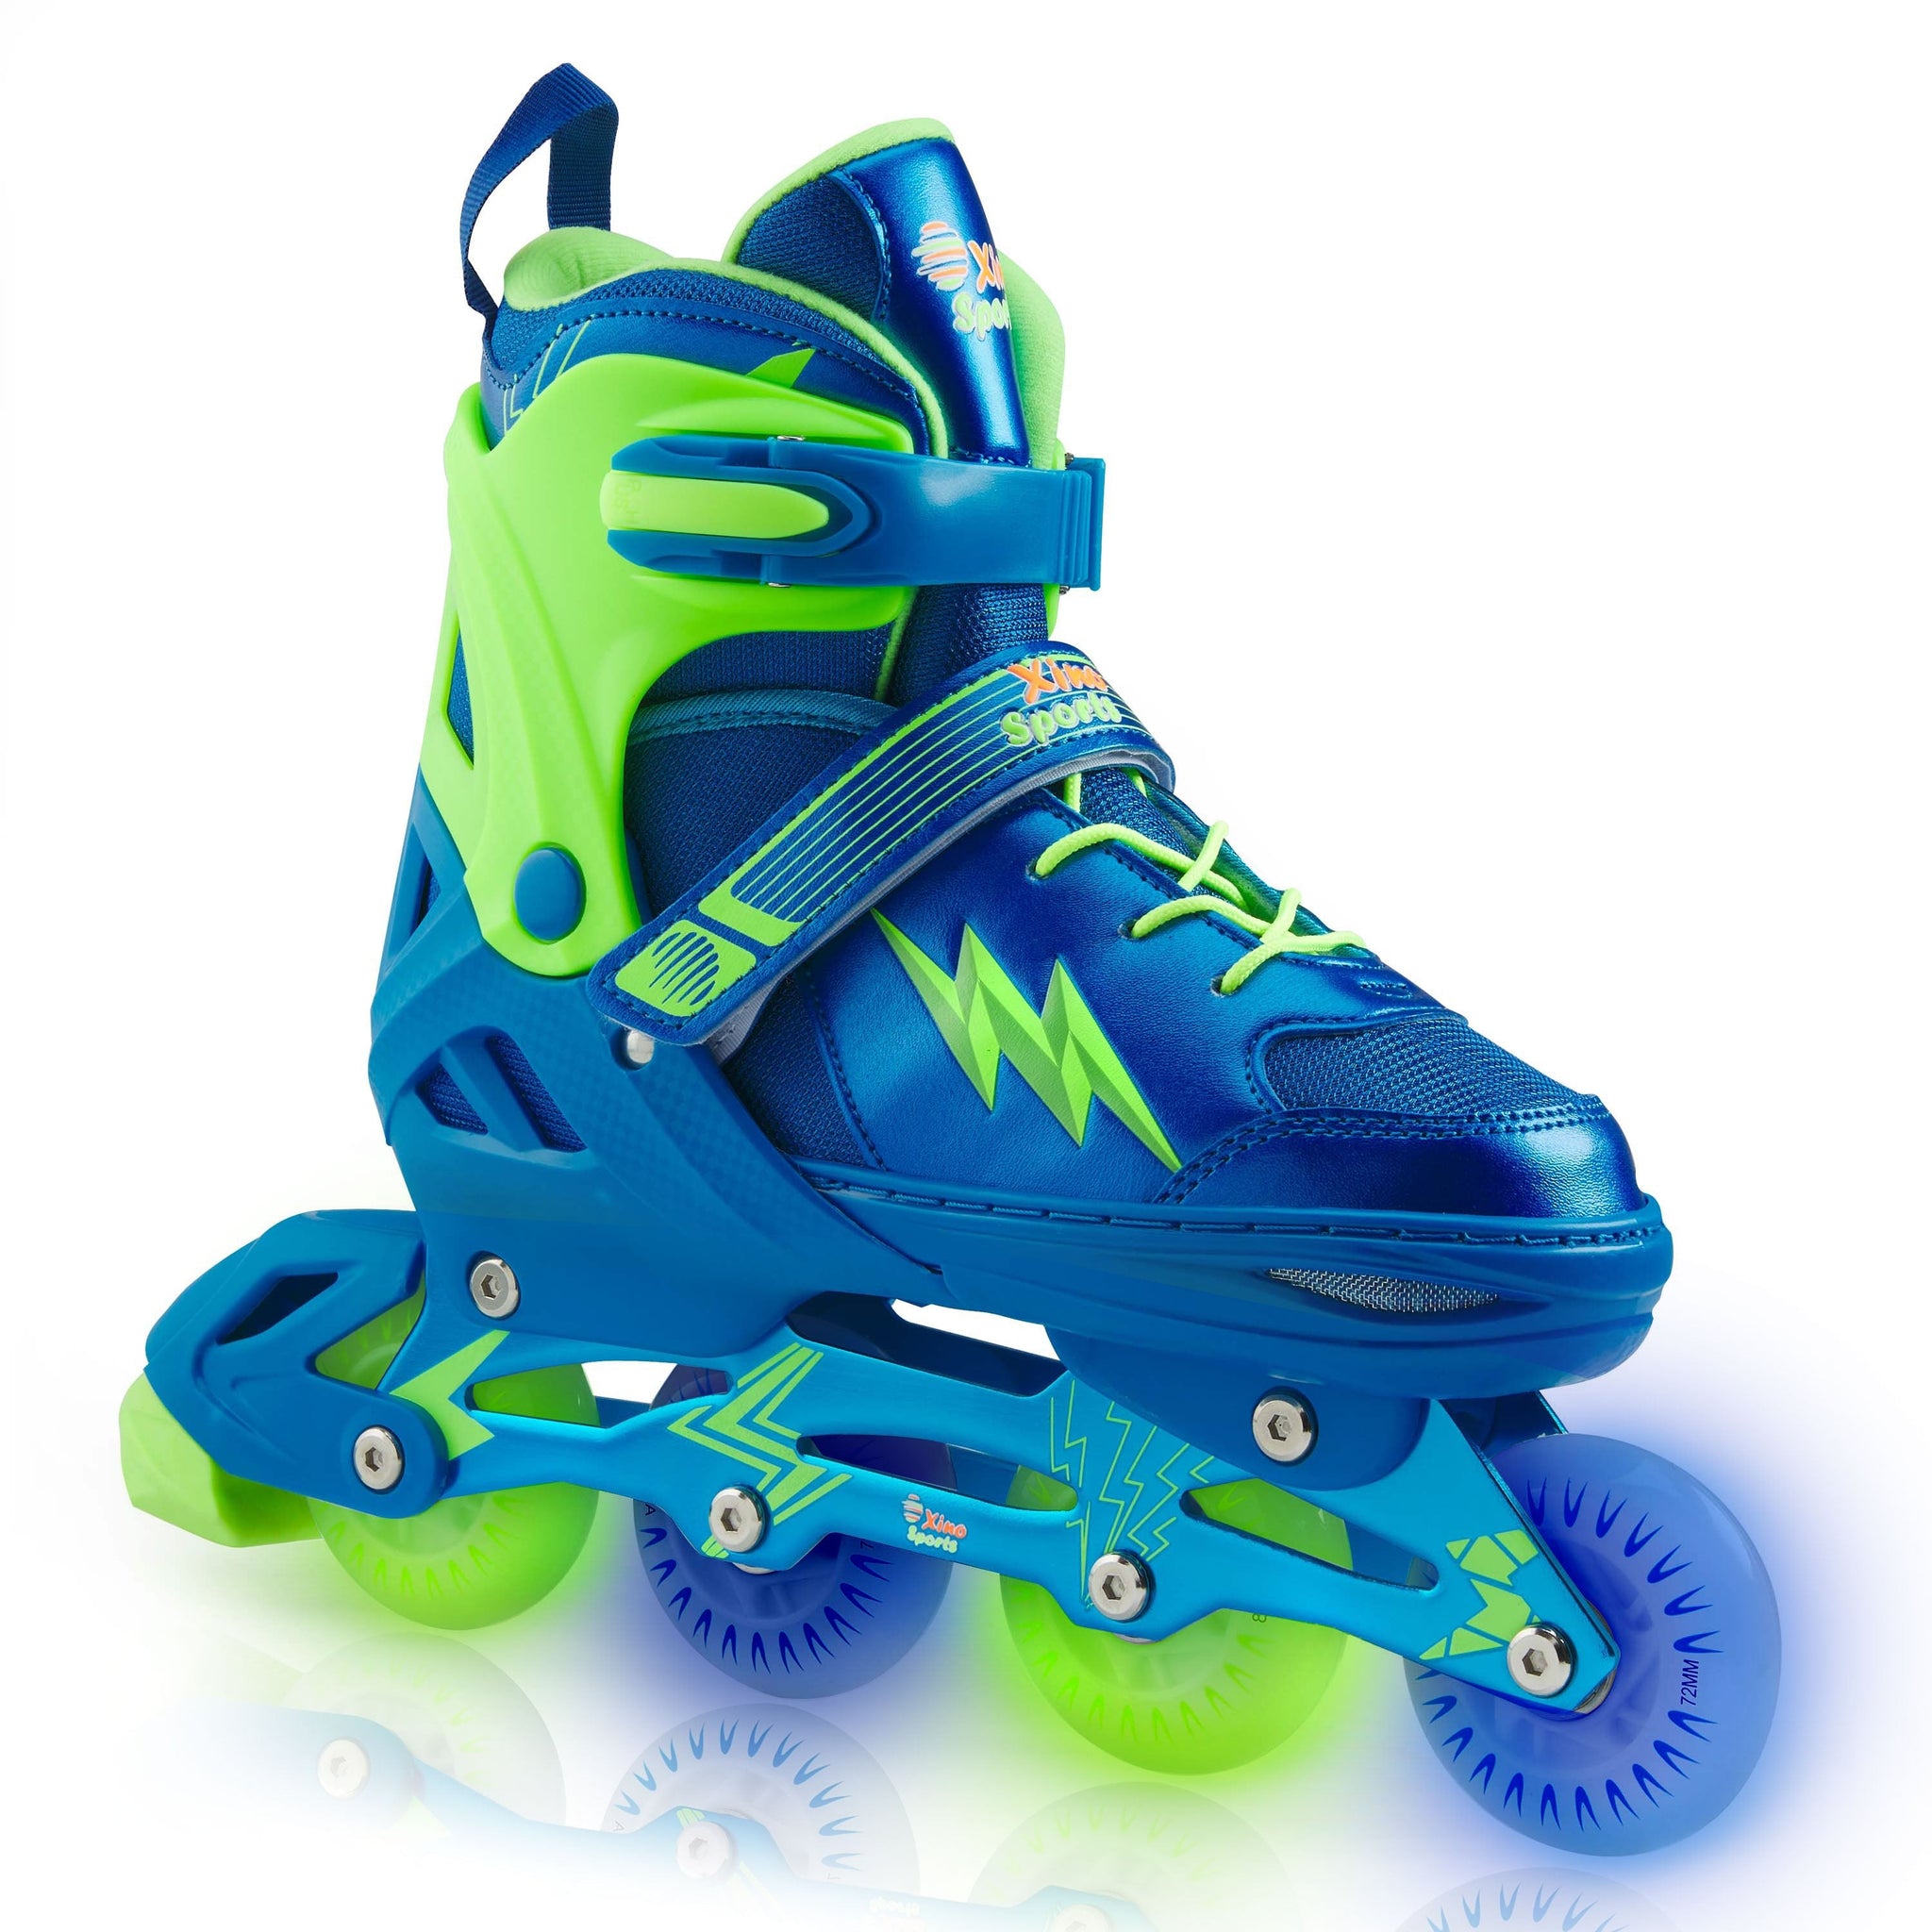 The Best Roller Skates (2021): Helmets, Protection, and More